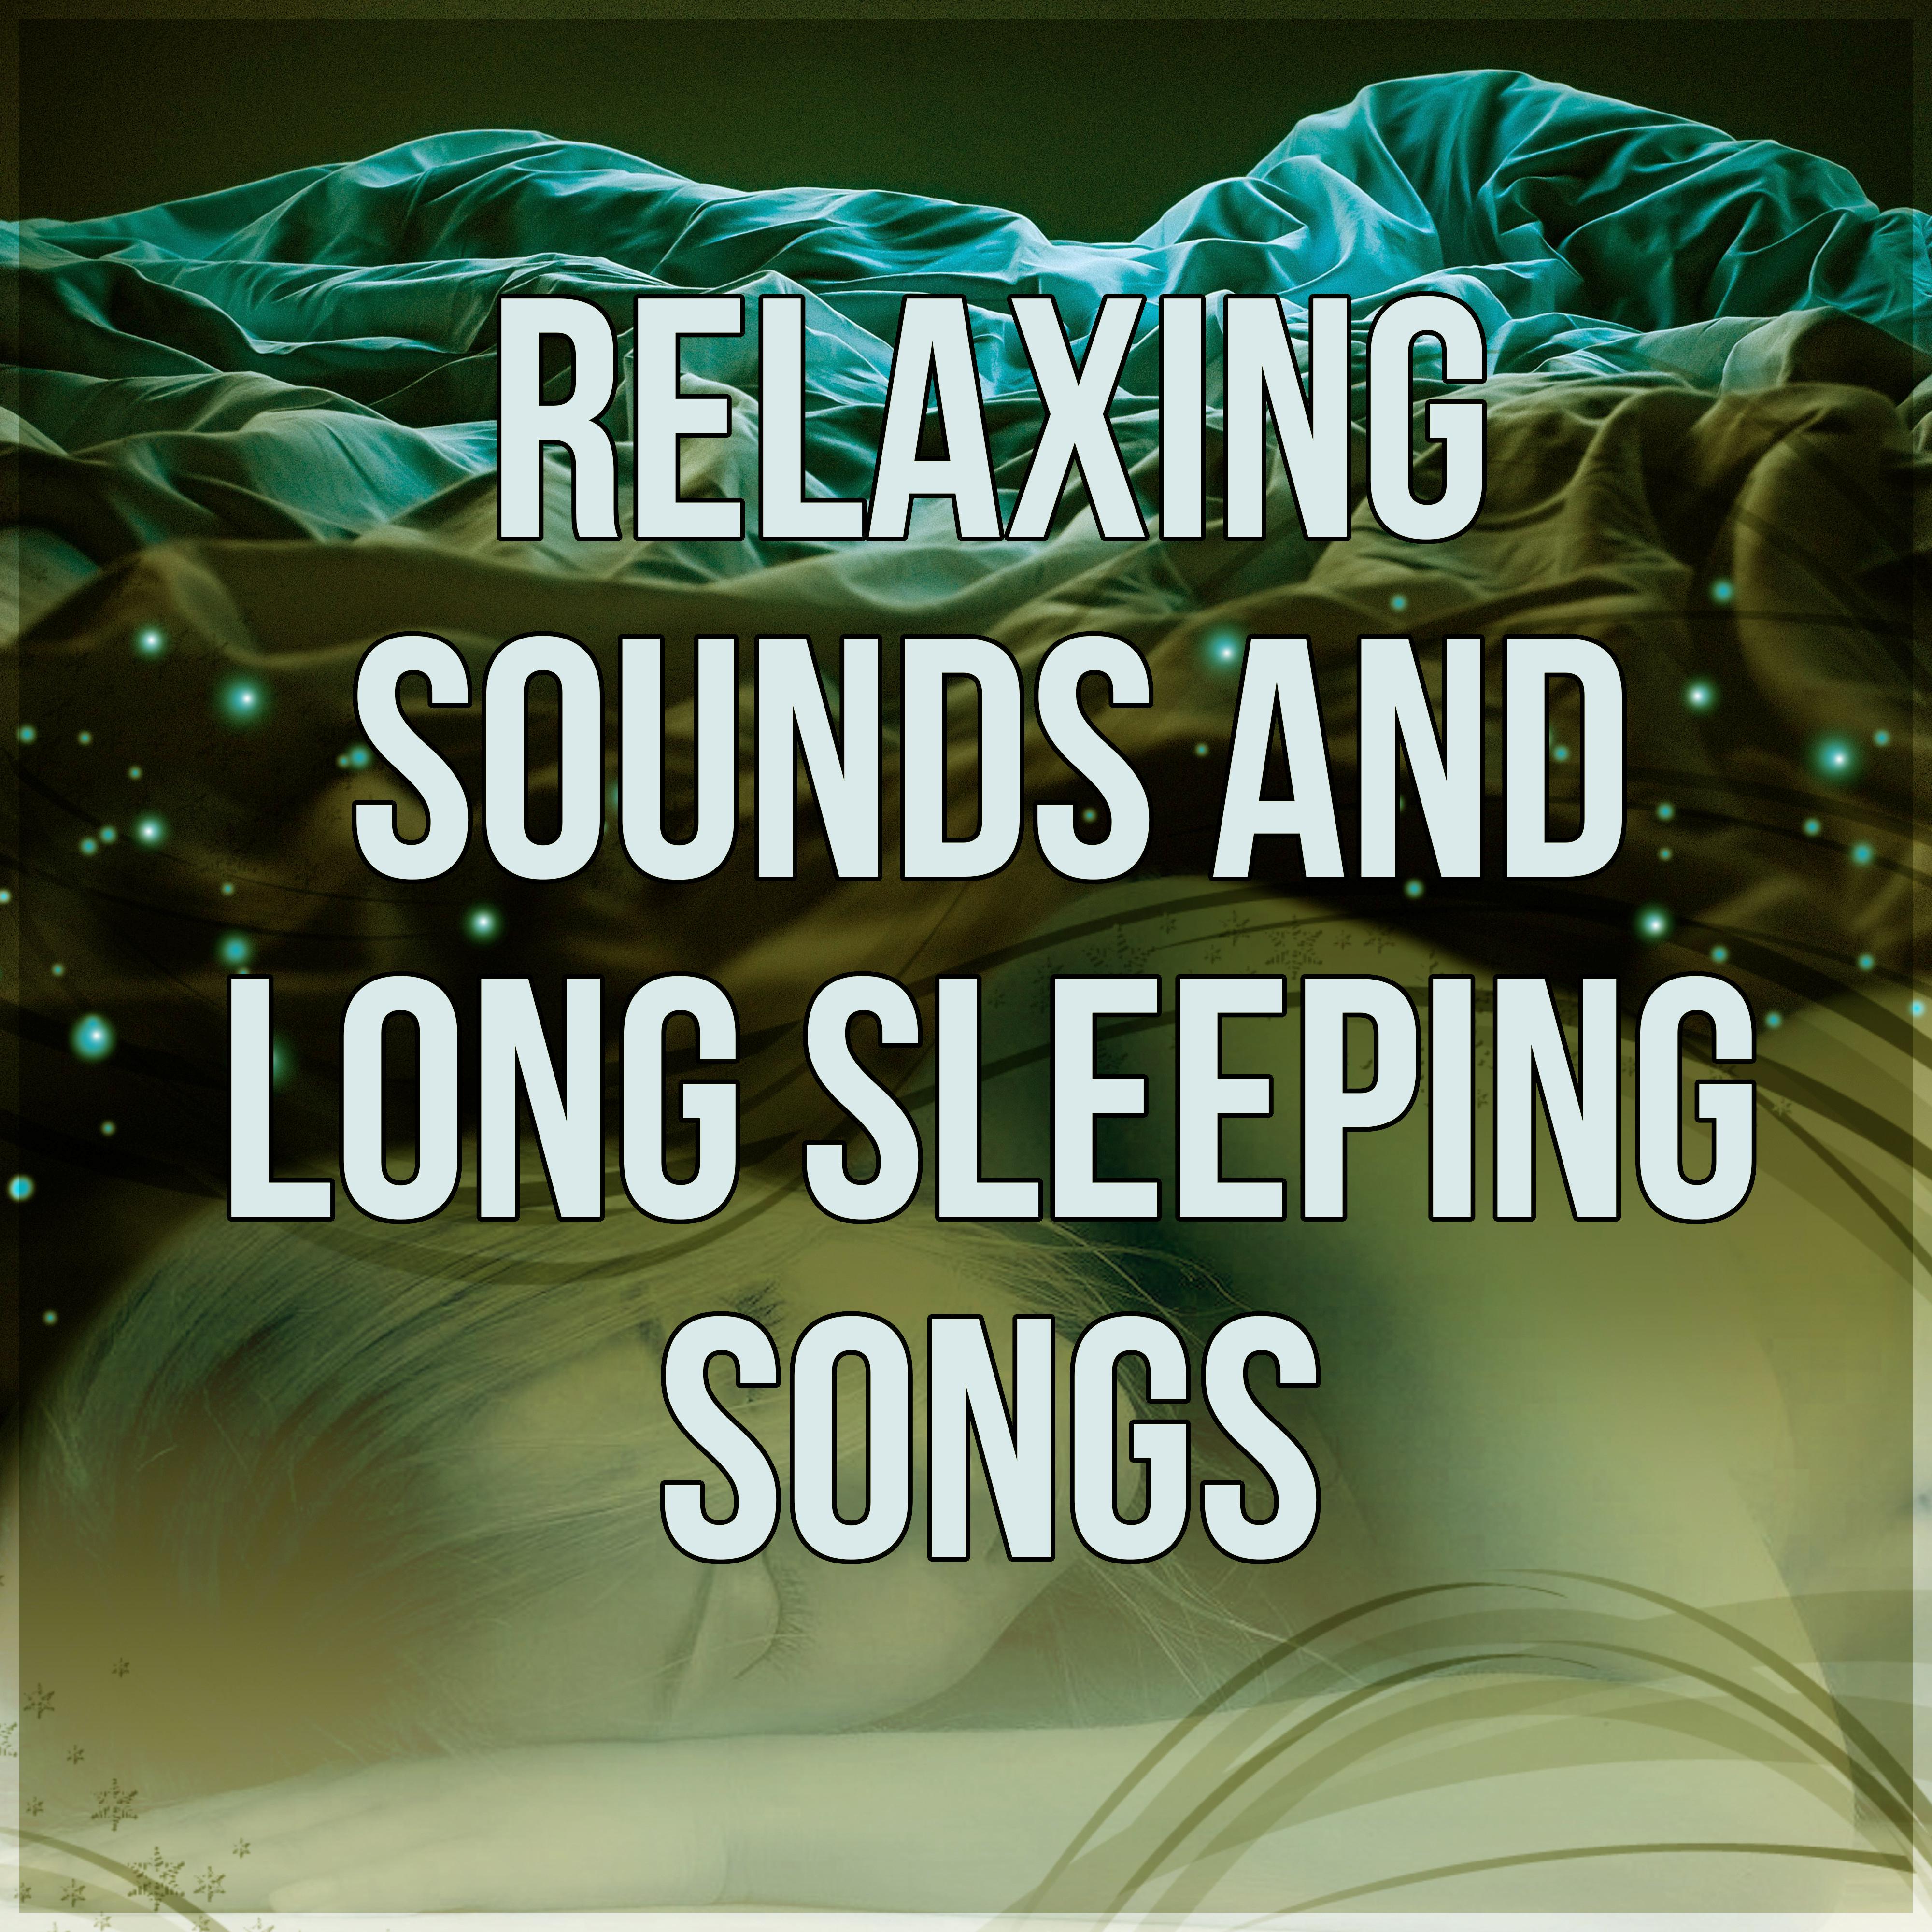 Relaxing Sounds and Long Sleeping Songs - Calm Music for Sensual Massage and Deep Sleep, Sleep All Night, Piano Songs, Restful Sleep, Sounds of Nature